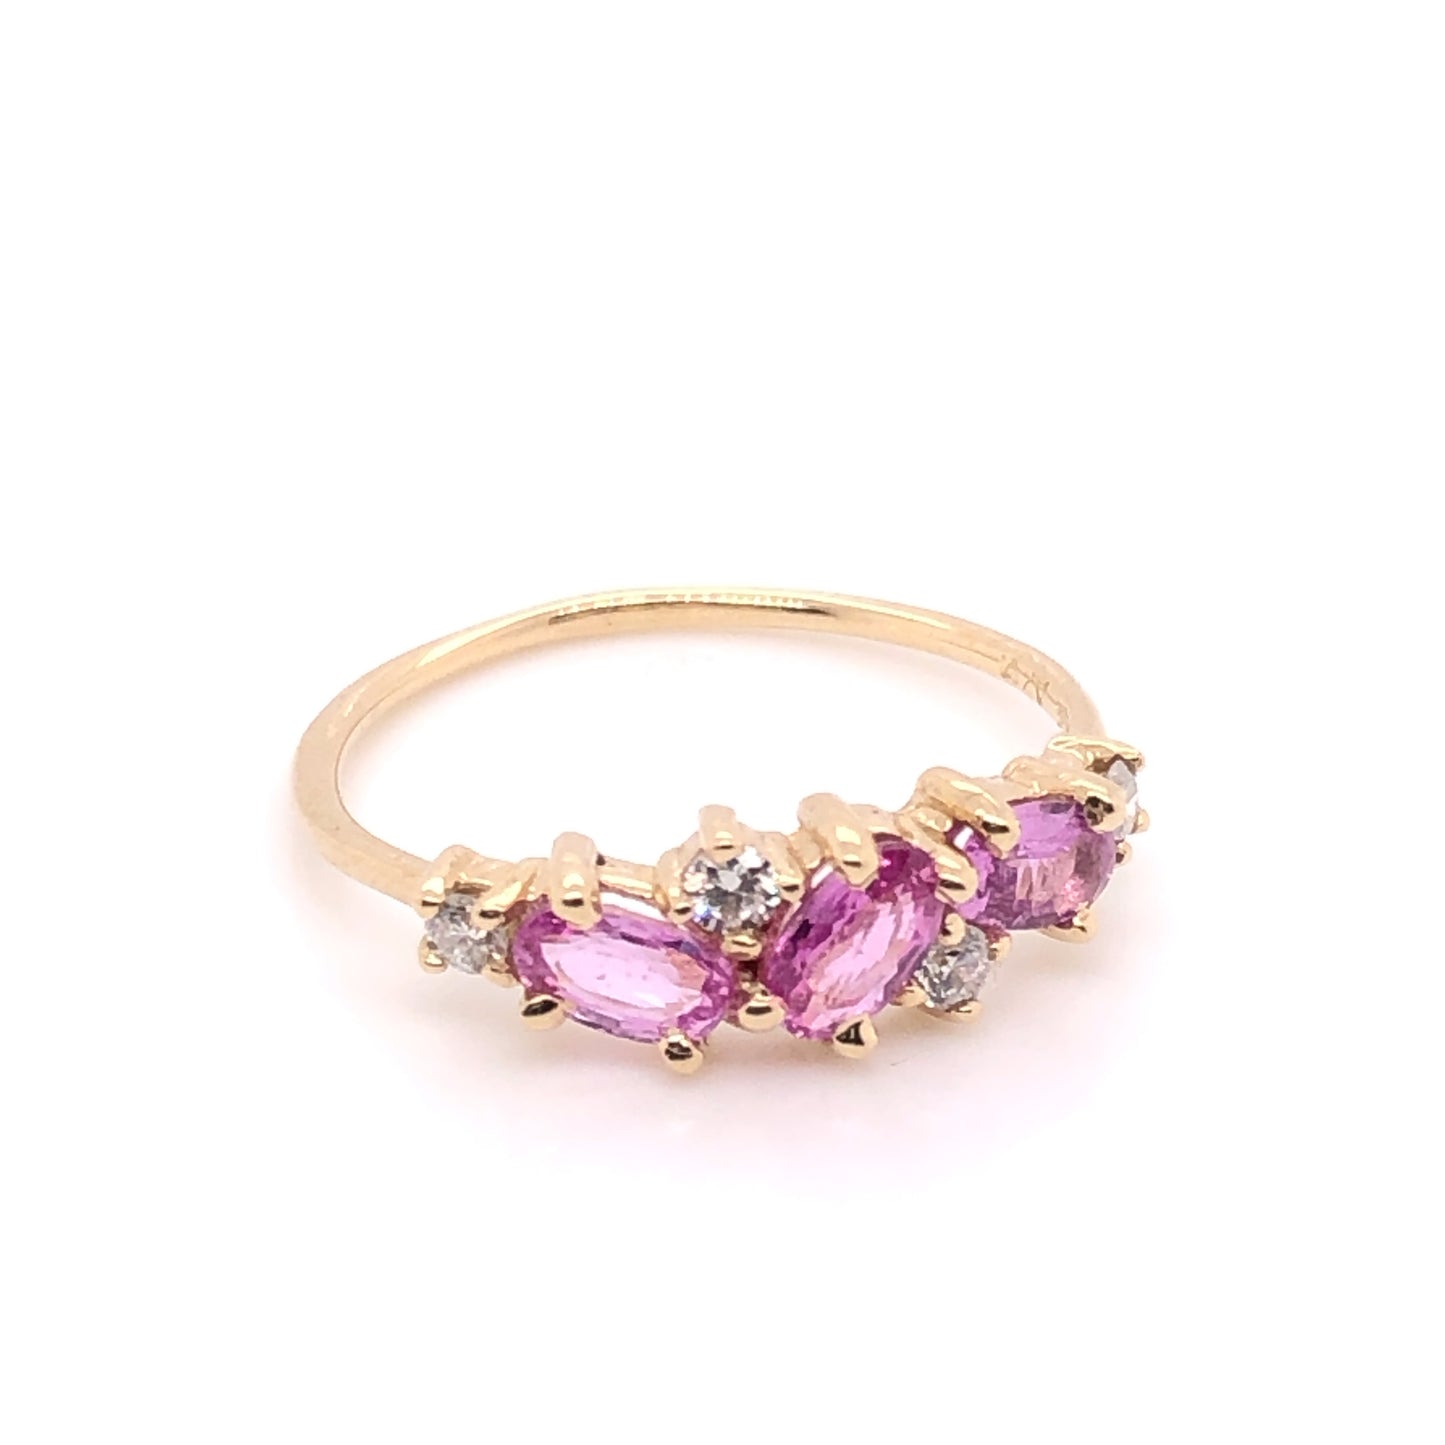 IMMEDIATE DELIVERY / Laura Pink Sapphire Ring / 14k Yellow Gold / Size 6.5